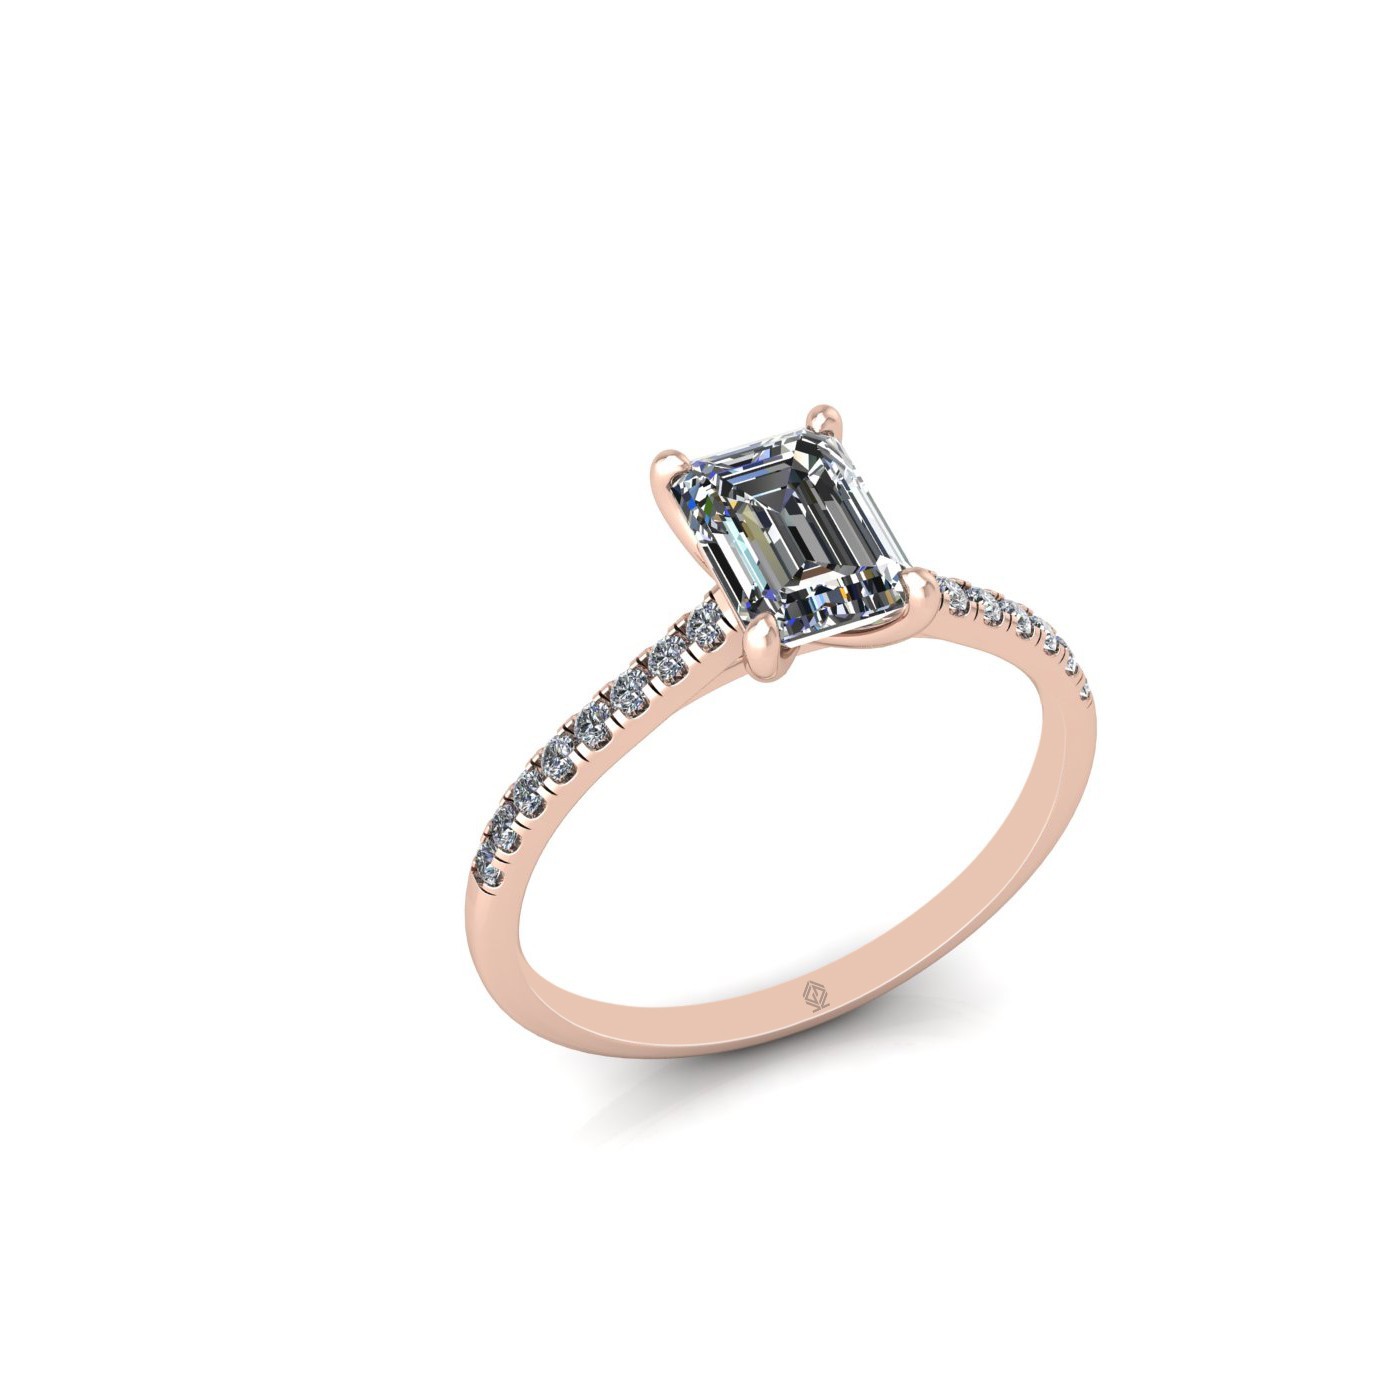 18K ROSE GOLD 4 PRONGS EMERALD CUT DIAMOND ENGAGEMENT RING WITH WHISPER THIN PAVÉ SET BAND